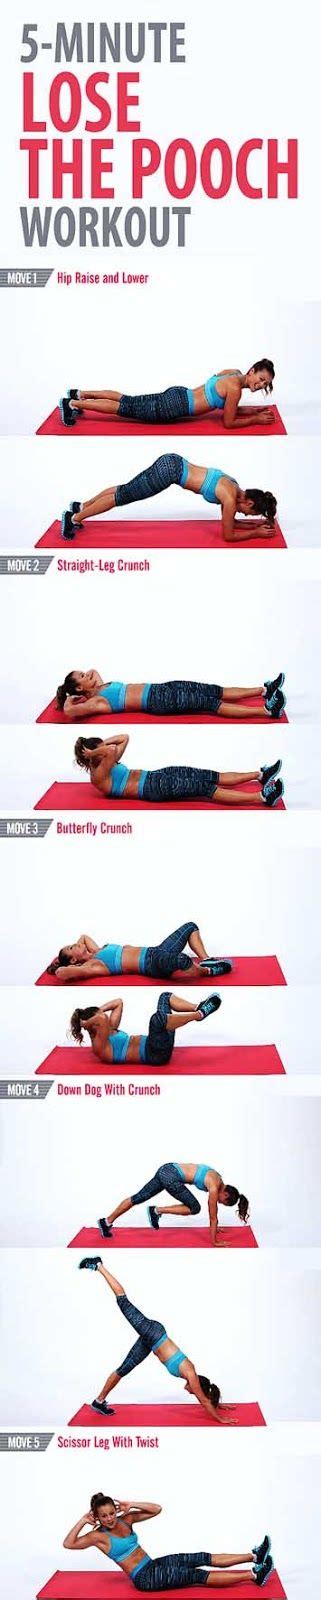 Health And Fitness 5 Minute Lose The Pooch Workout Pooch Workout Abs Workout For Women Exercise